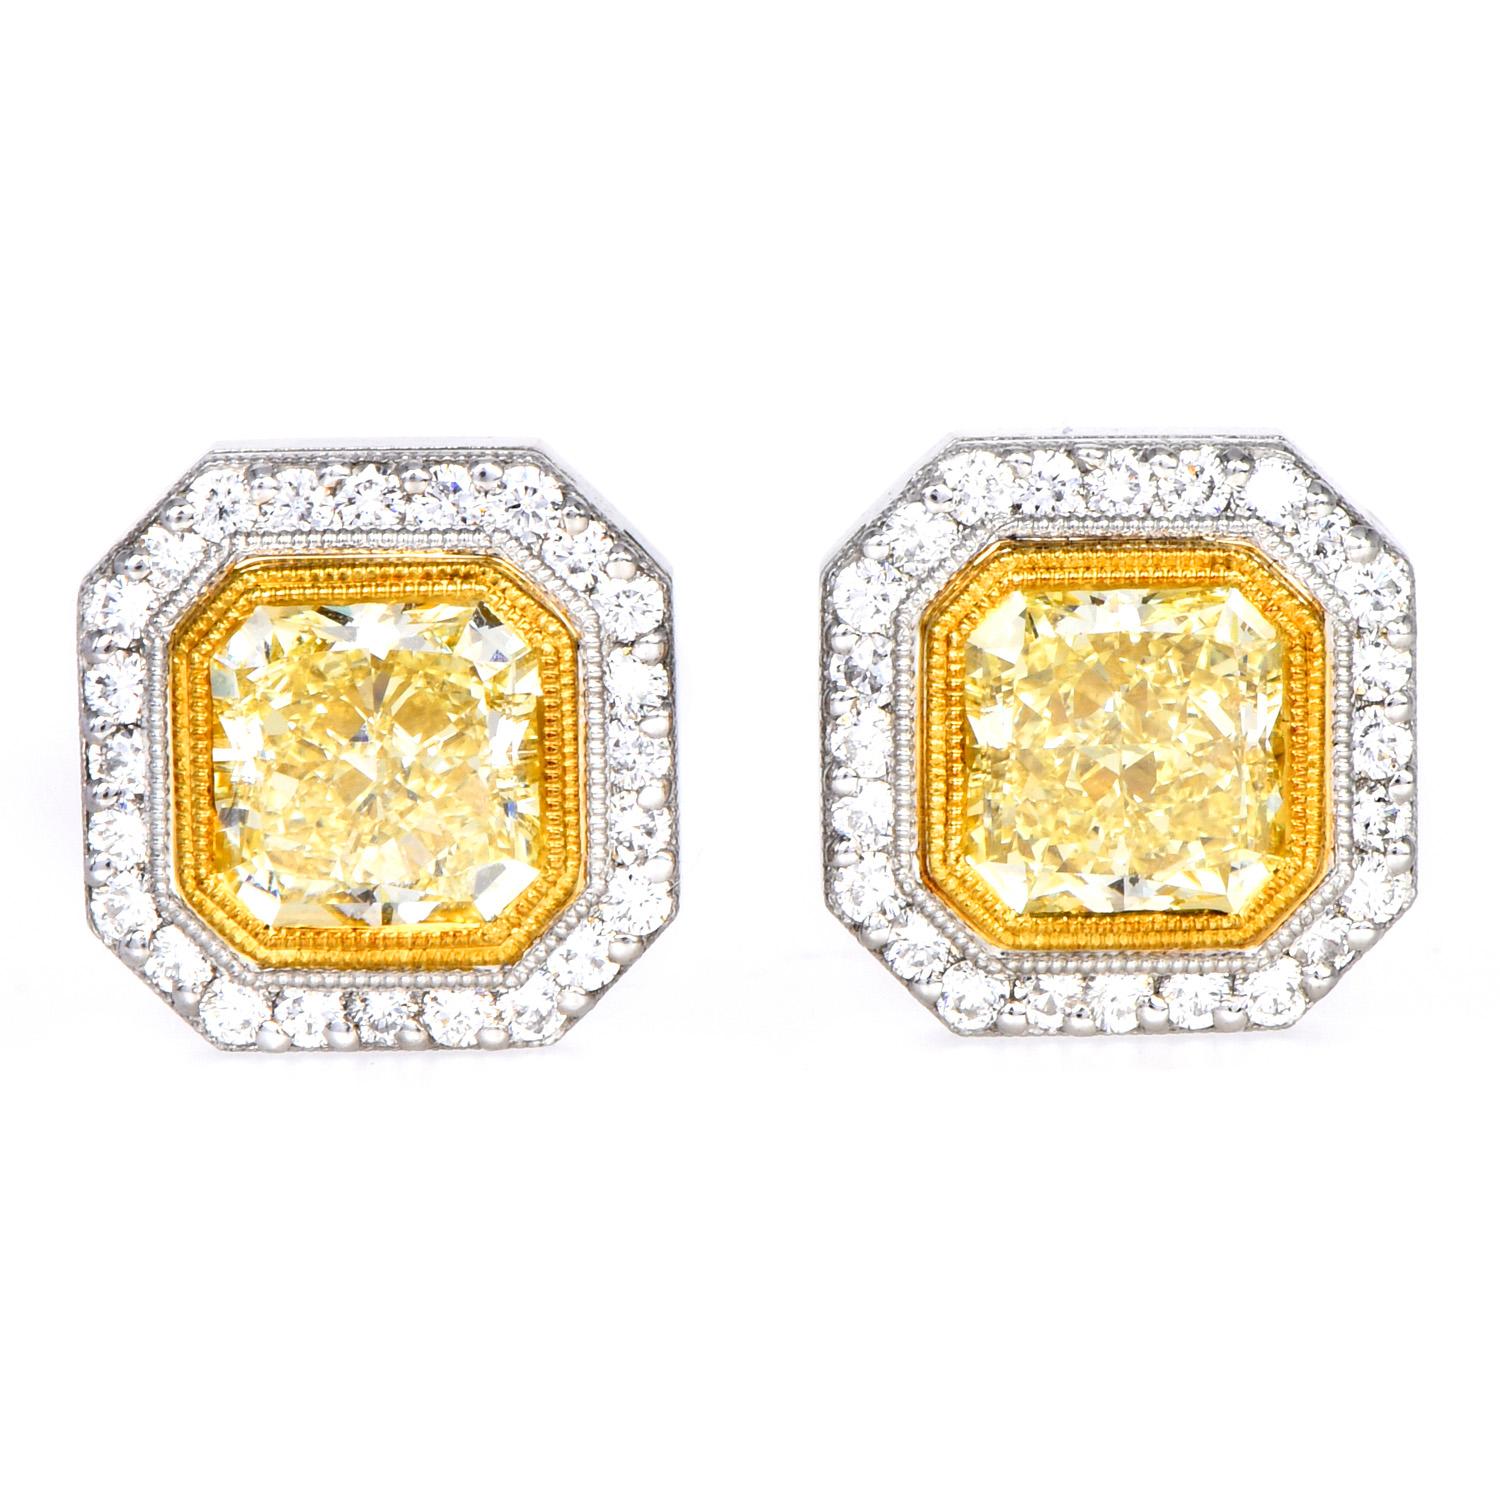 These opulent Yellow Natural Fancy Diamond and White Diamond

stud earrings, bring the classic look to a new level.

 Crafted in Platinum with 18K yellow gold accents. 

Features two vibrant natural intense yellow  Cushion-cut Diamond in the